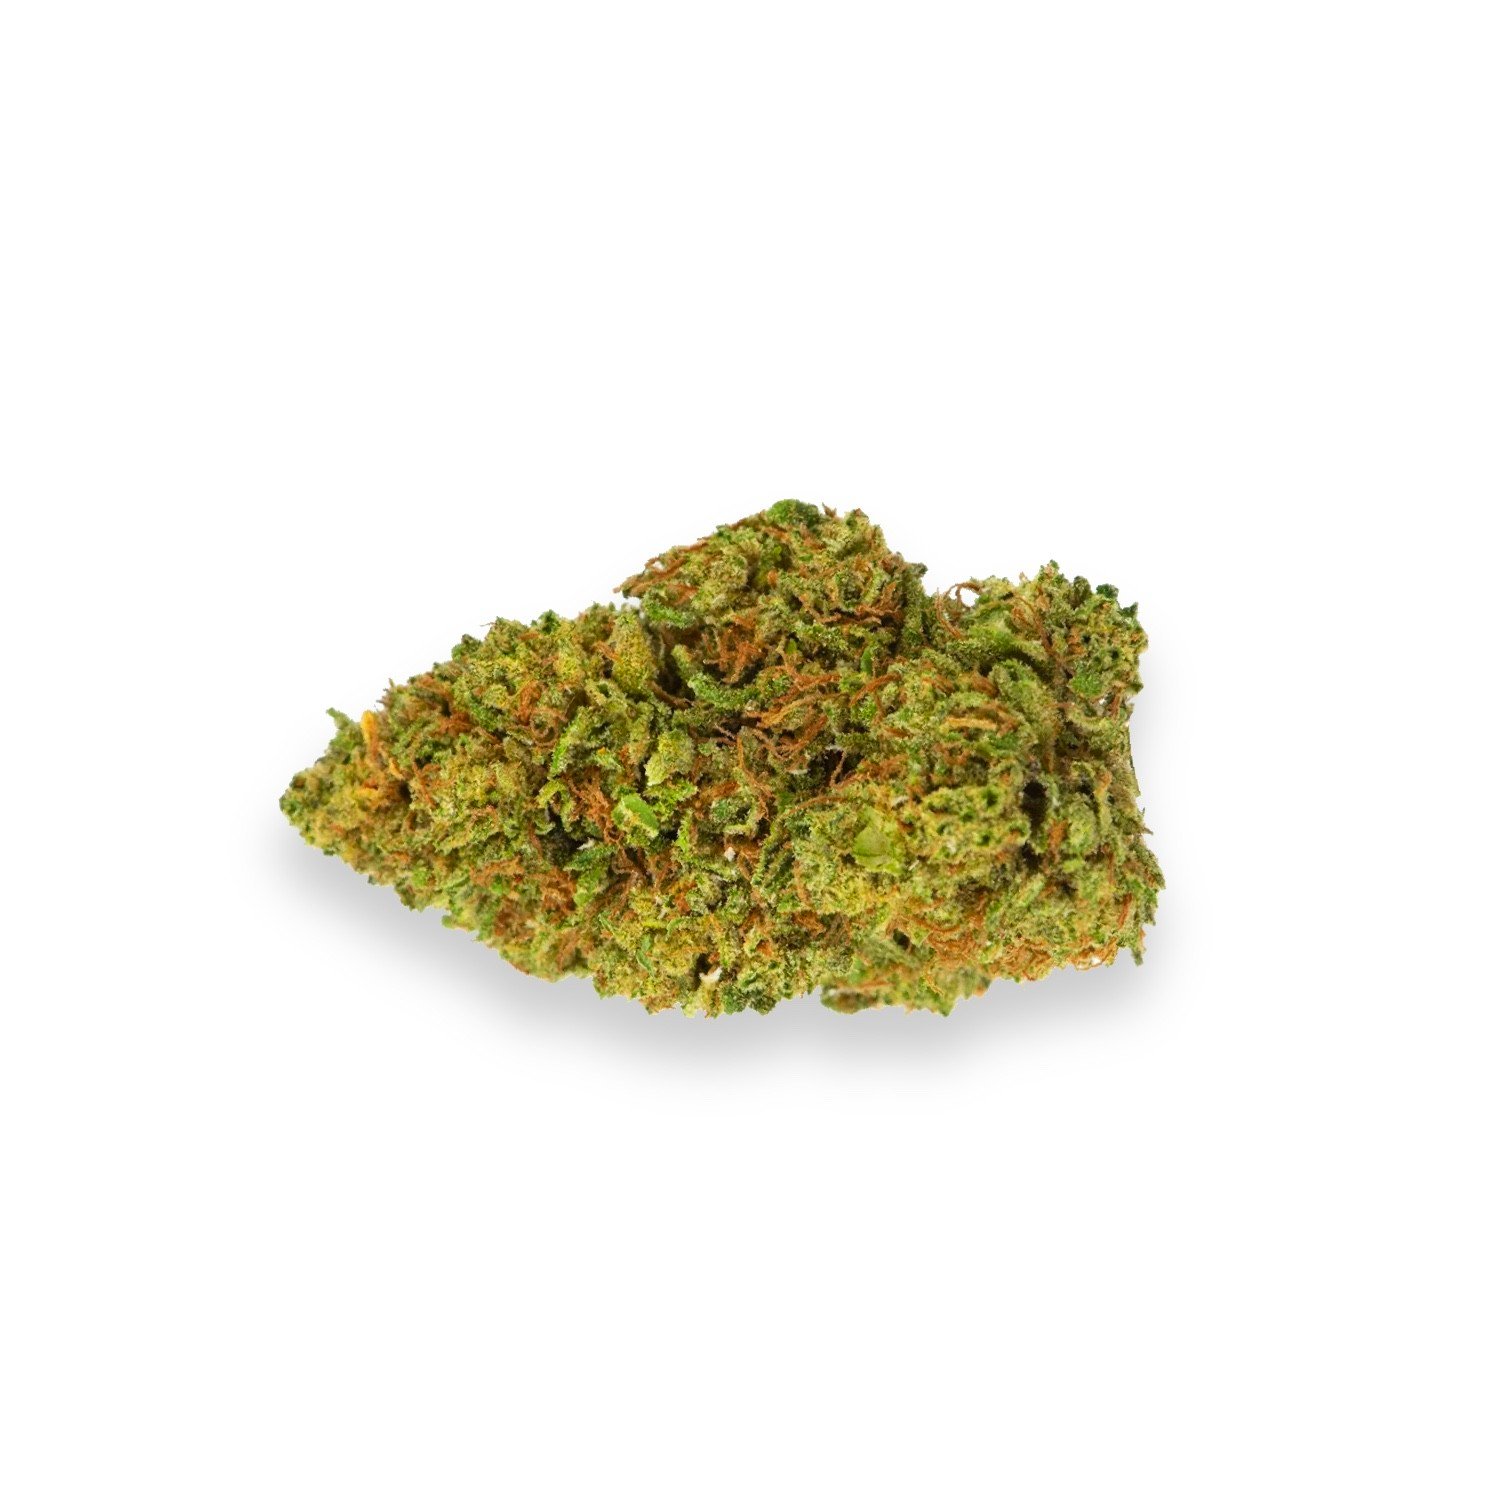 Lifter Strain Review